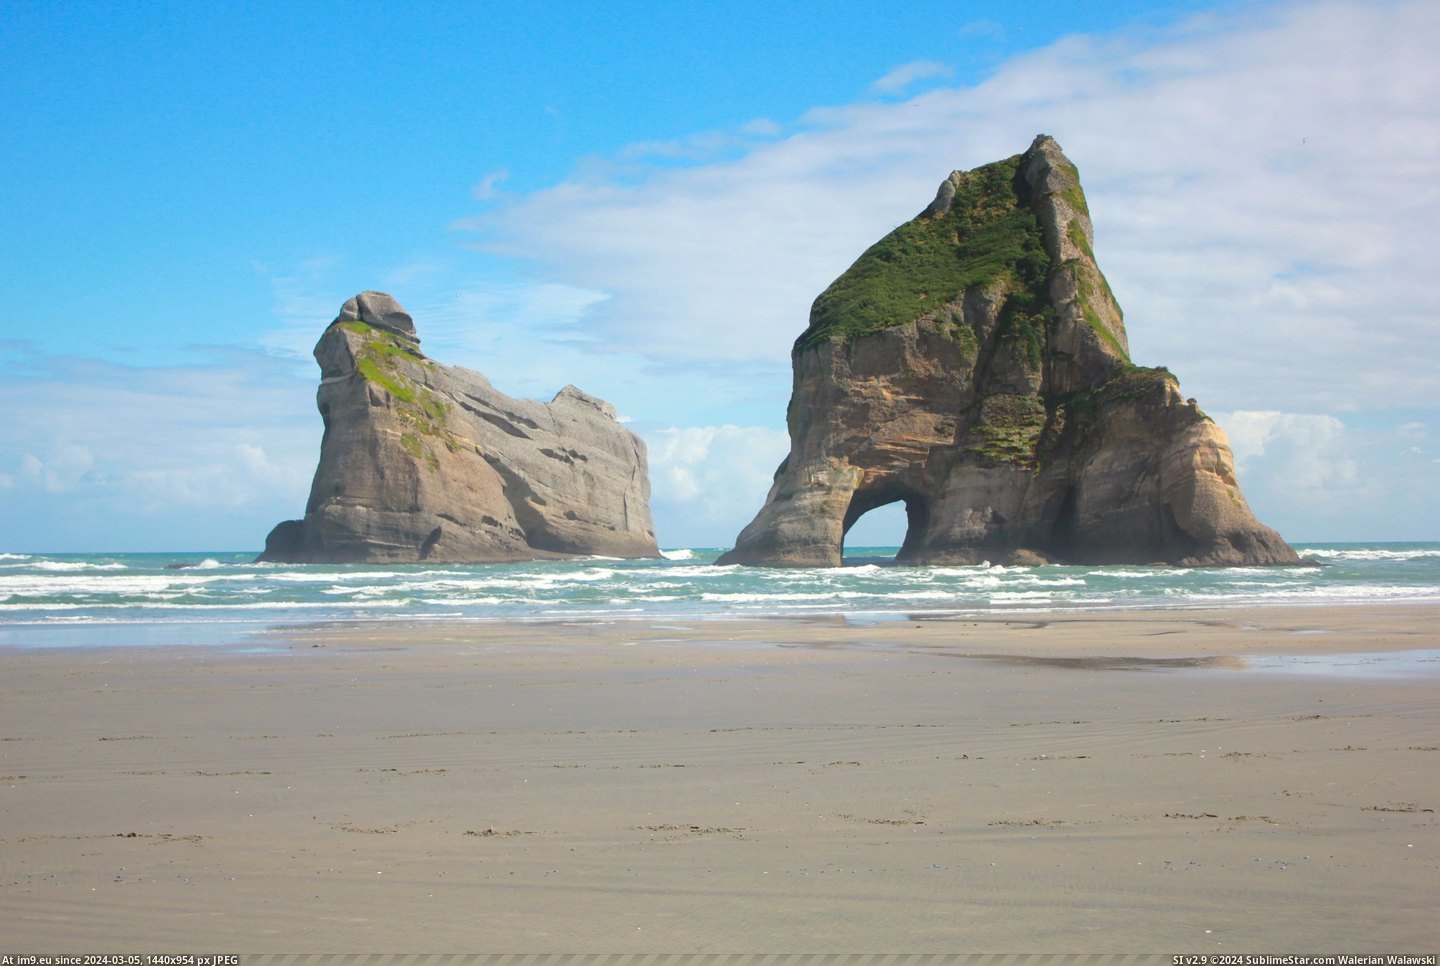 #Zealand #Islands #Puponga #3110x2073 #Archway [Earthporn] Puponga, Archway islands, New Zealand [3110x2073] Pic. (Bild von album My r/EARTHPORN favs))